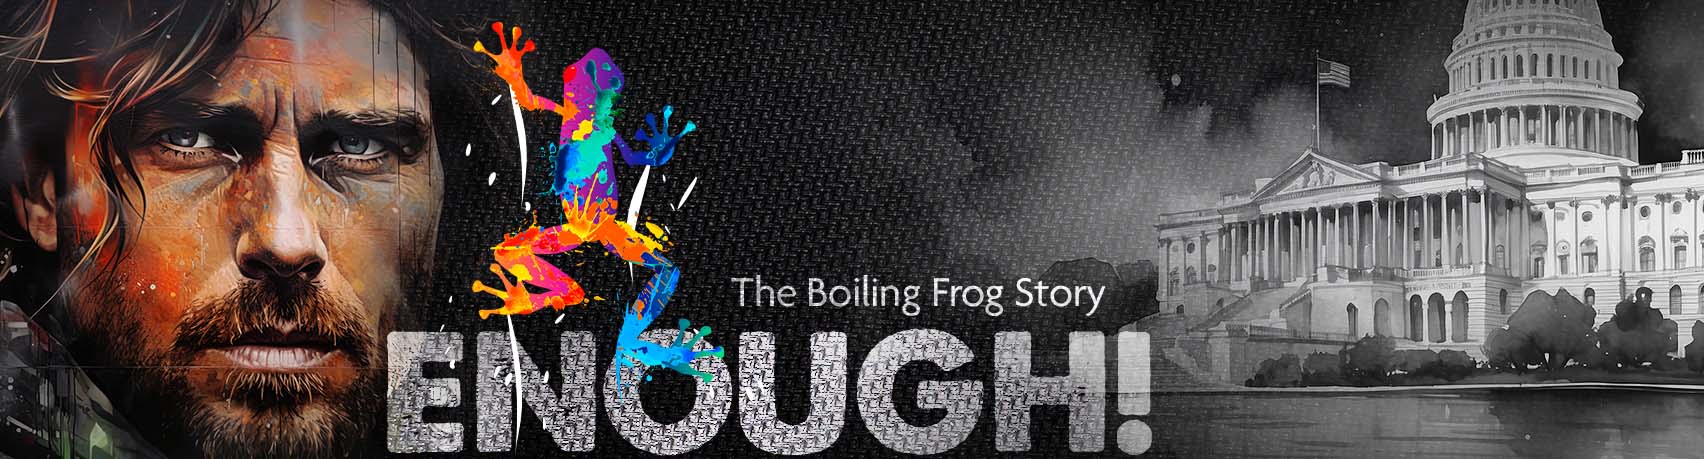 The Boiling Frog Story